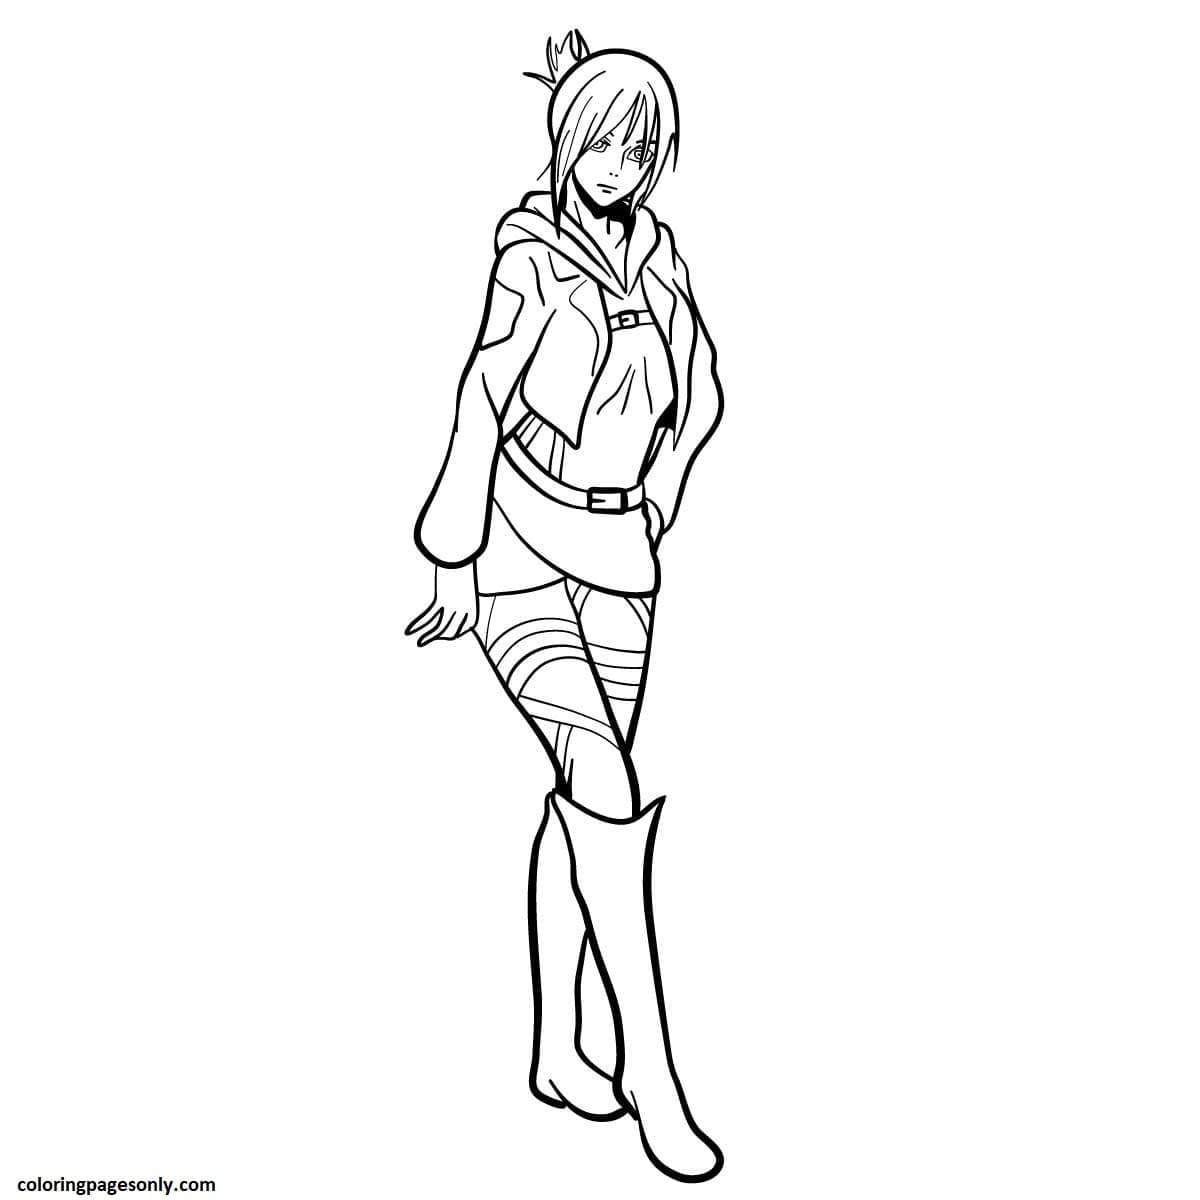 Mikasa full body Coloring Page